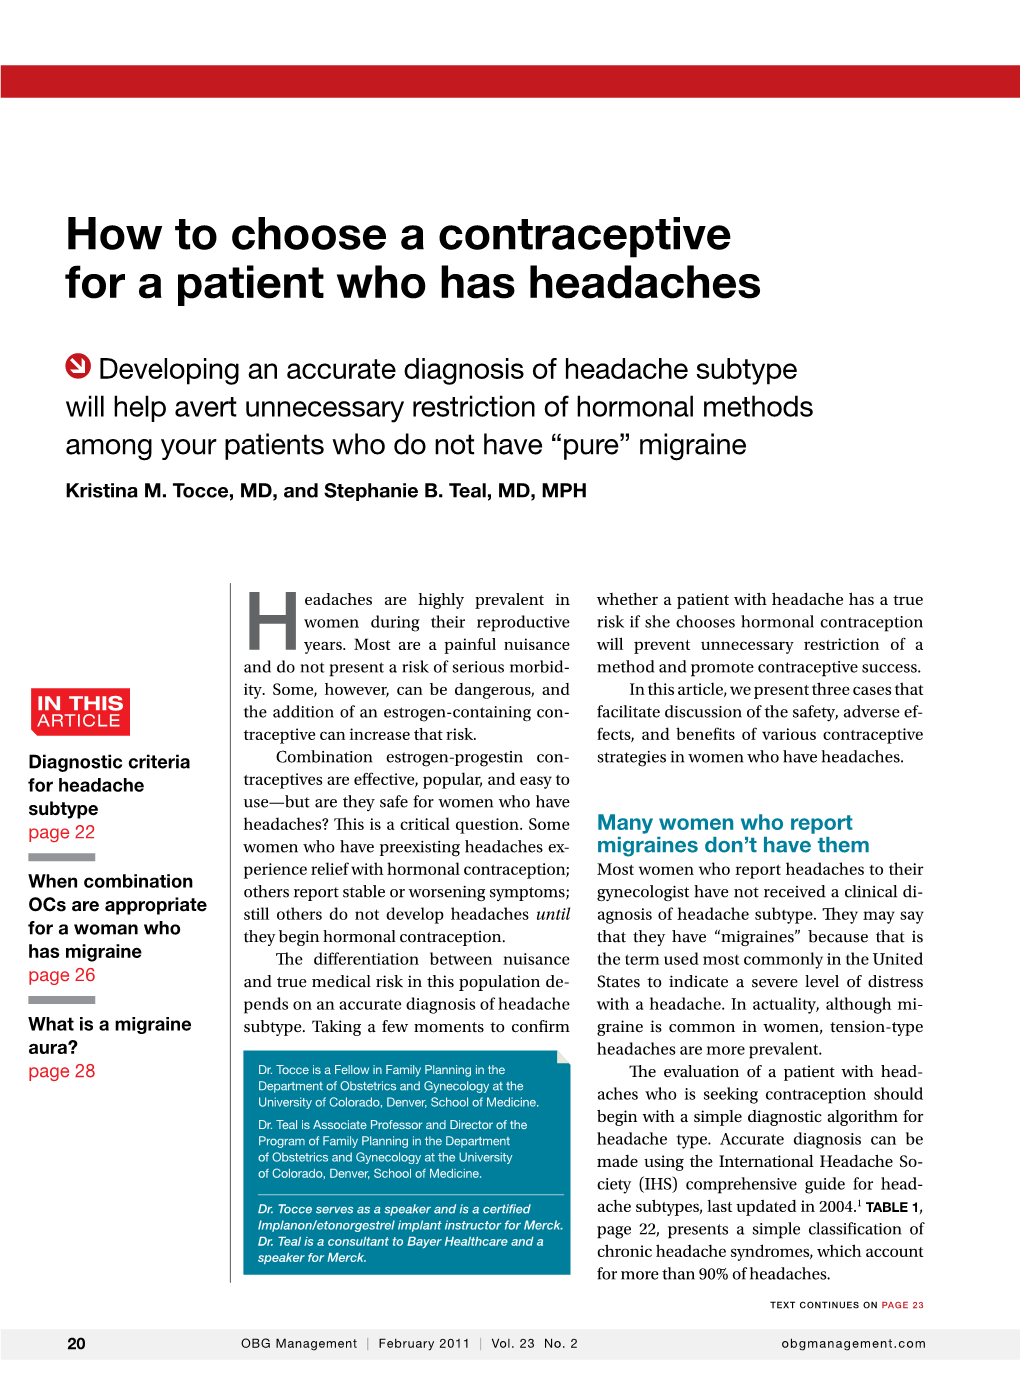 How to Choose a Contraceptive for a Patient Who Has Headaches